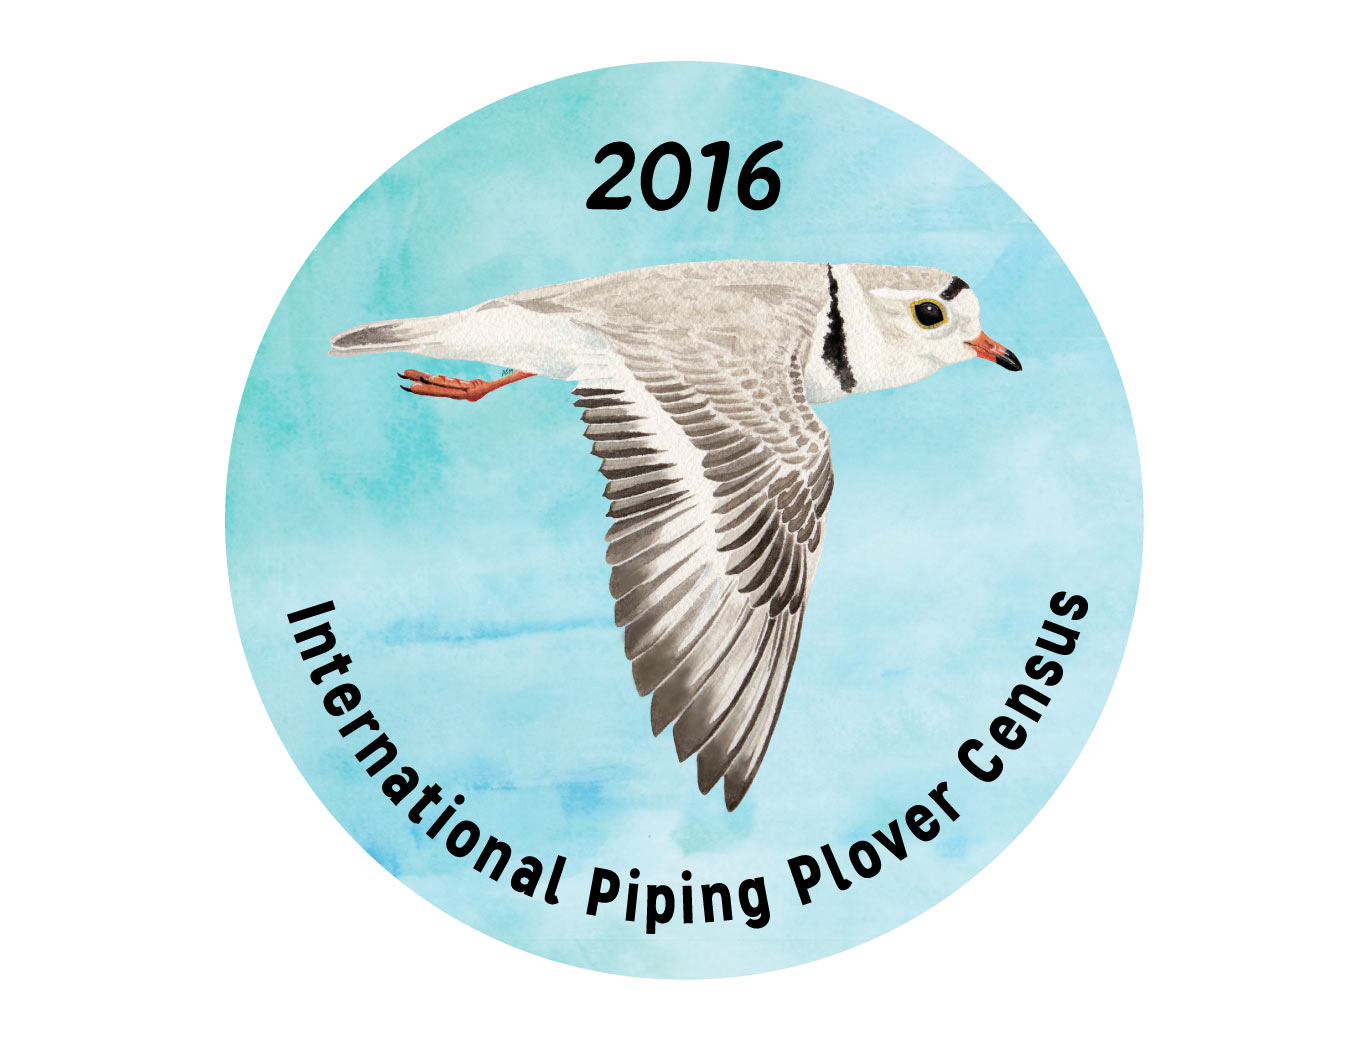  Button design commissioned by U.S.G.S for 2016 International Piping Plover survey volunteers, created with watercolor and Adobe Illustrator.&nbsp; 